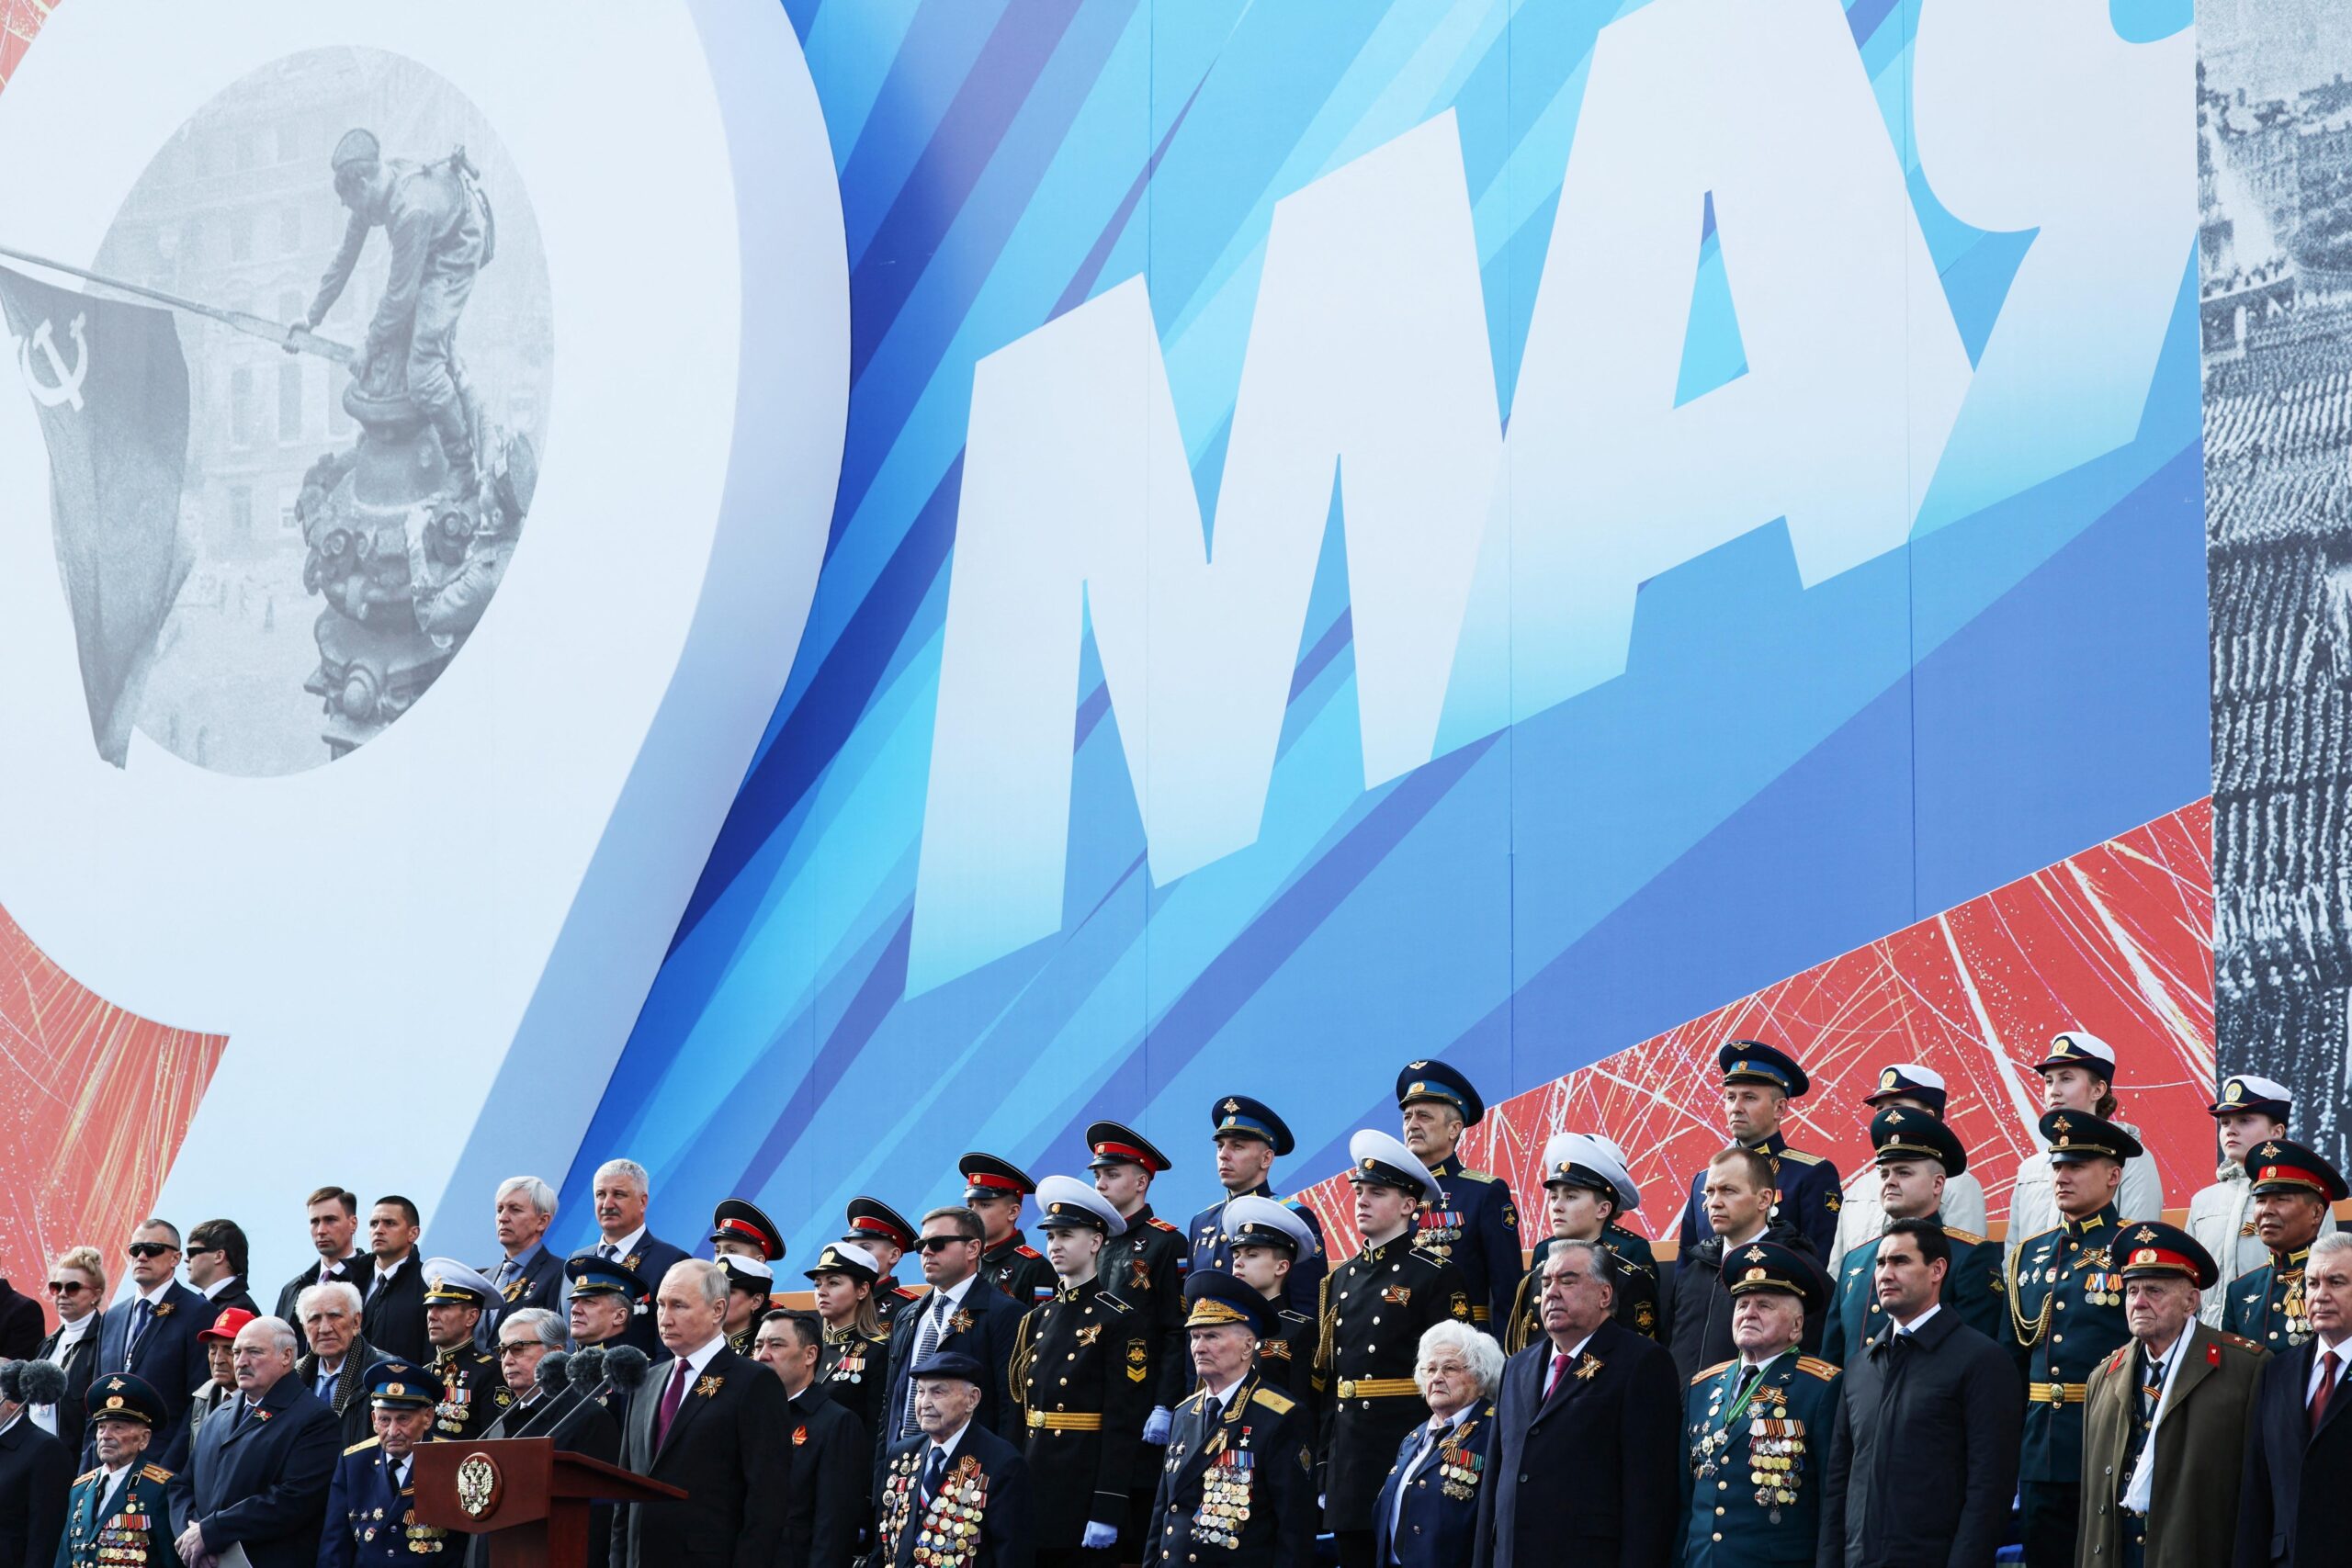 Russia honors unity at ‘key turning point’